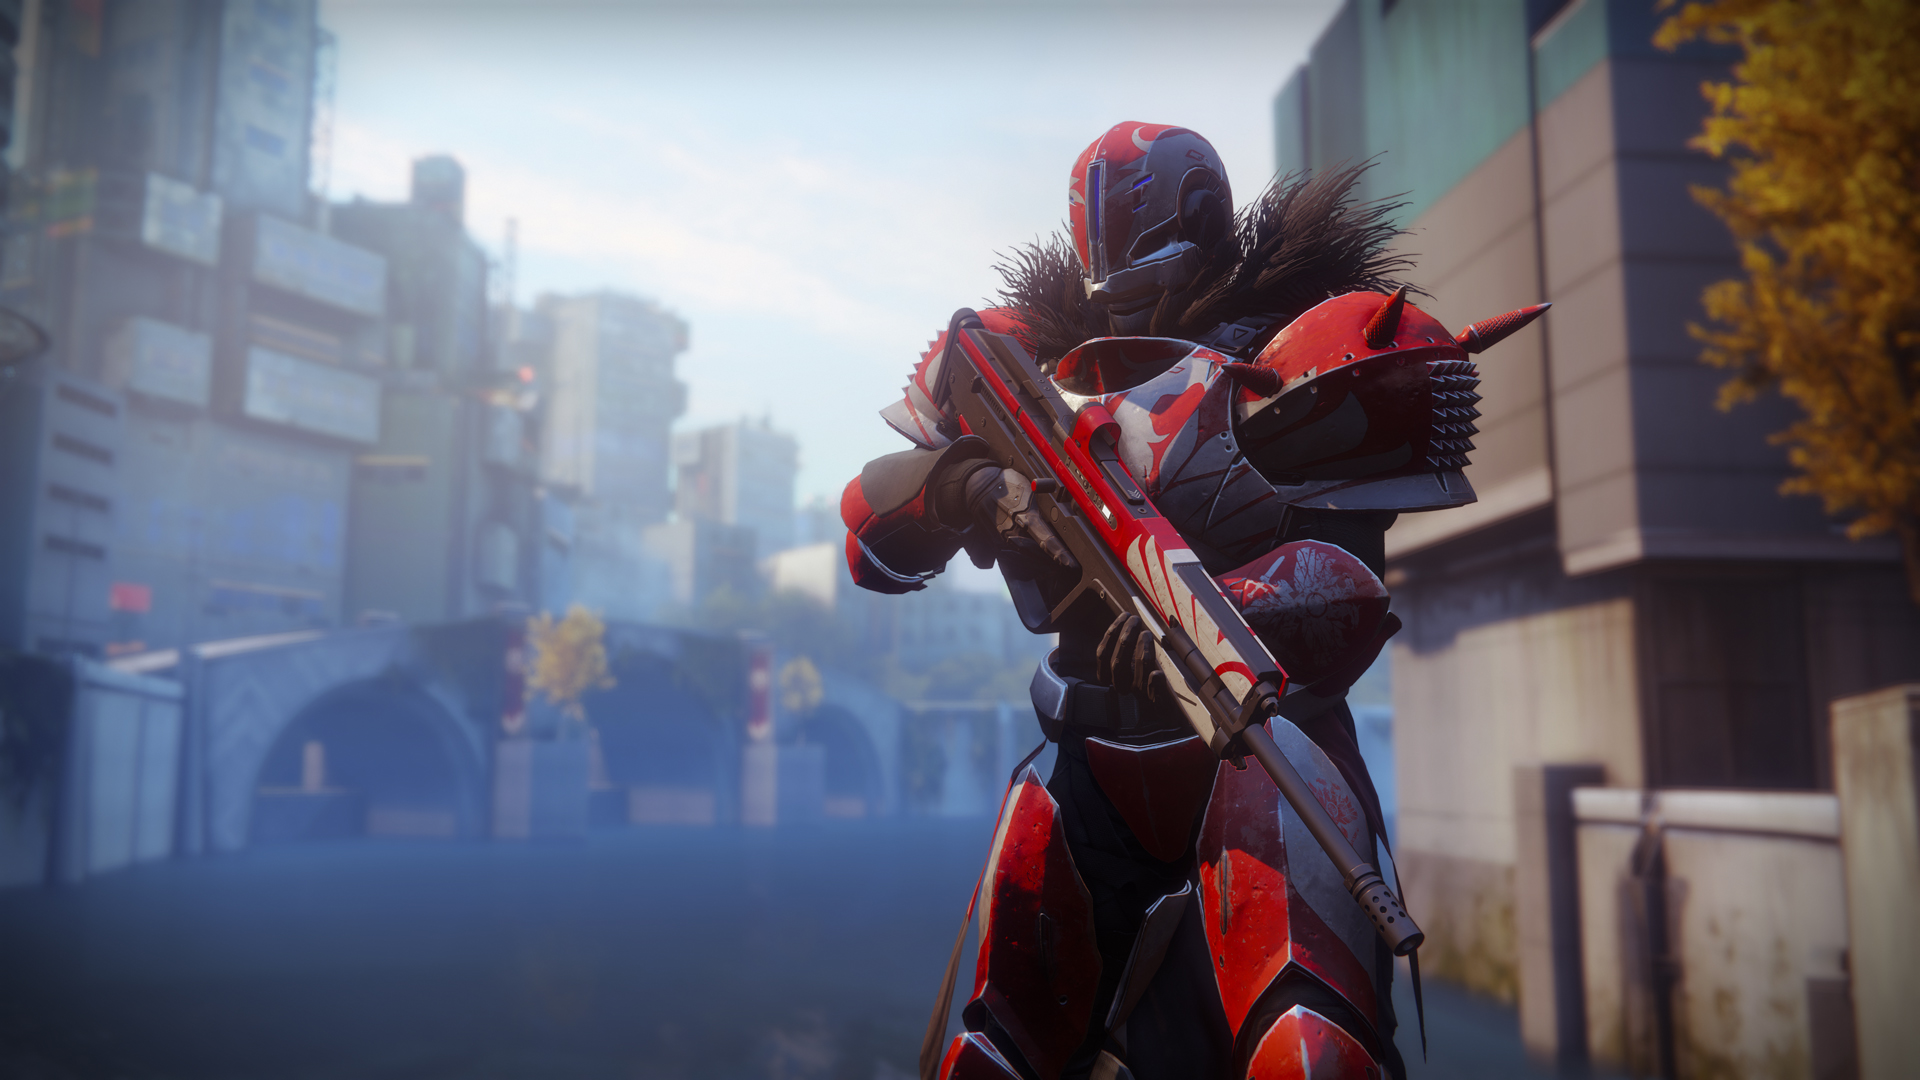 Does Destiny 2 Need A Guns-Only Crucible Mode